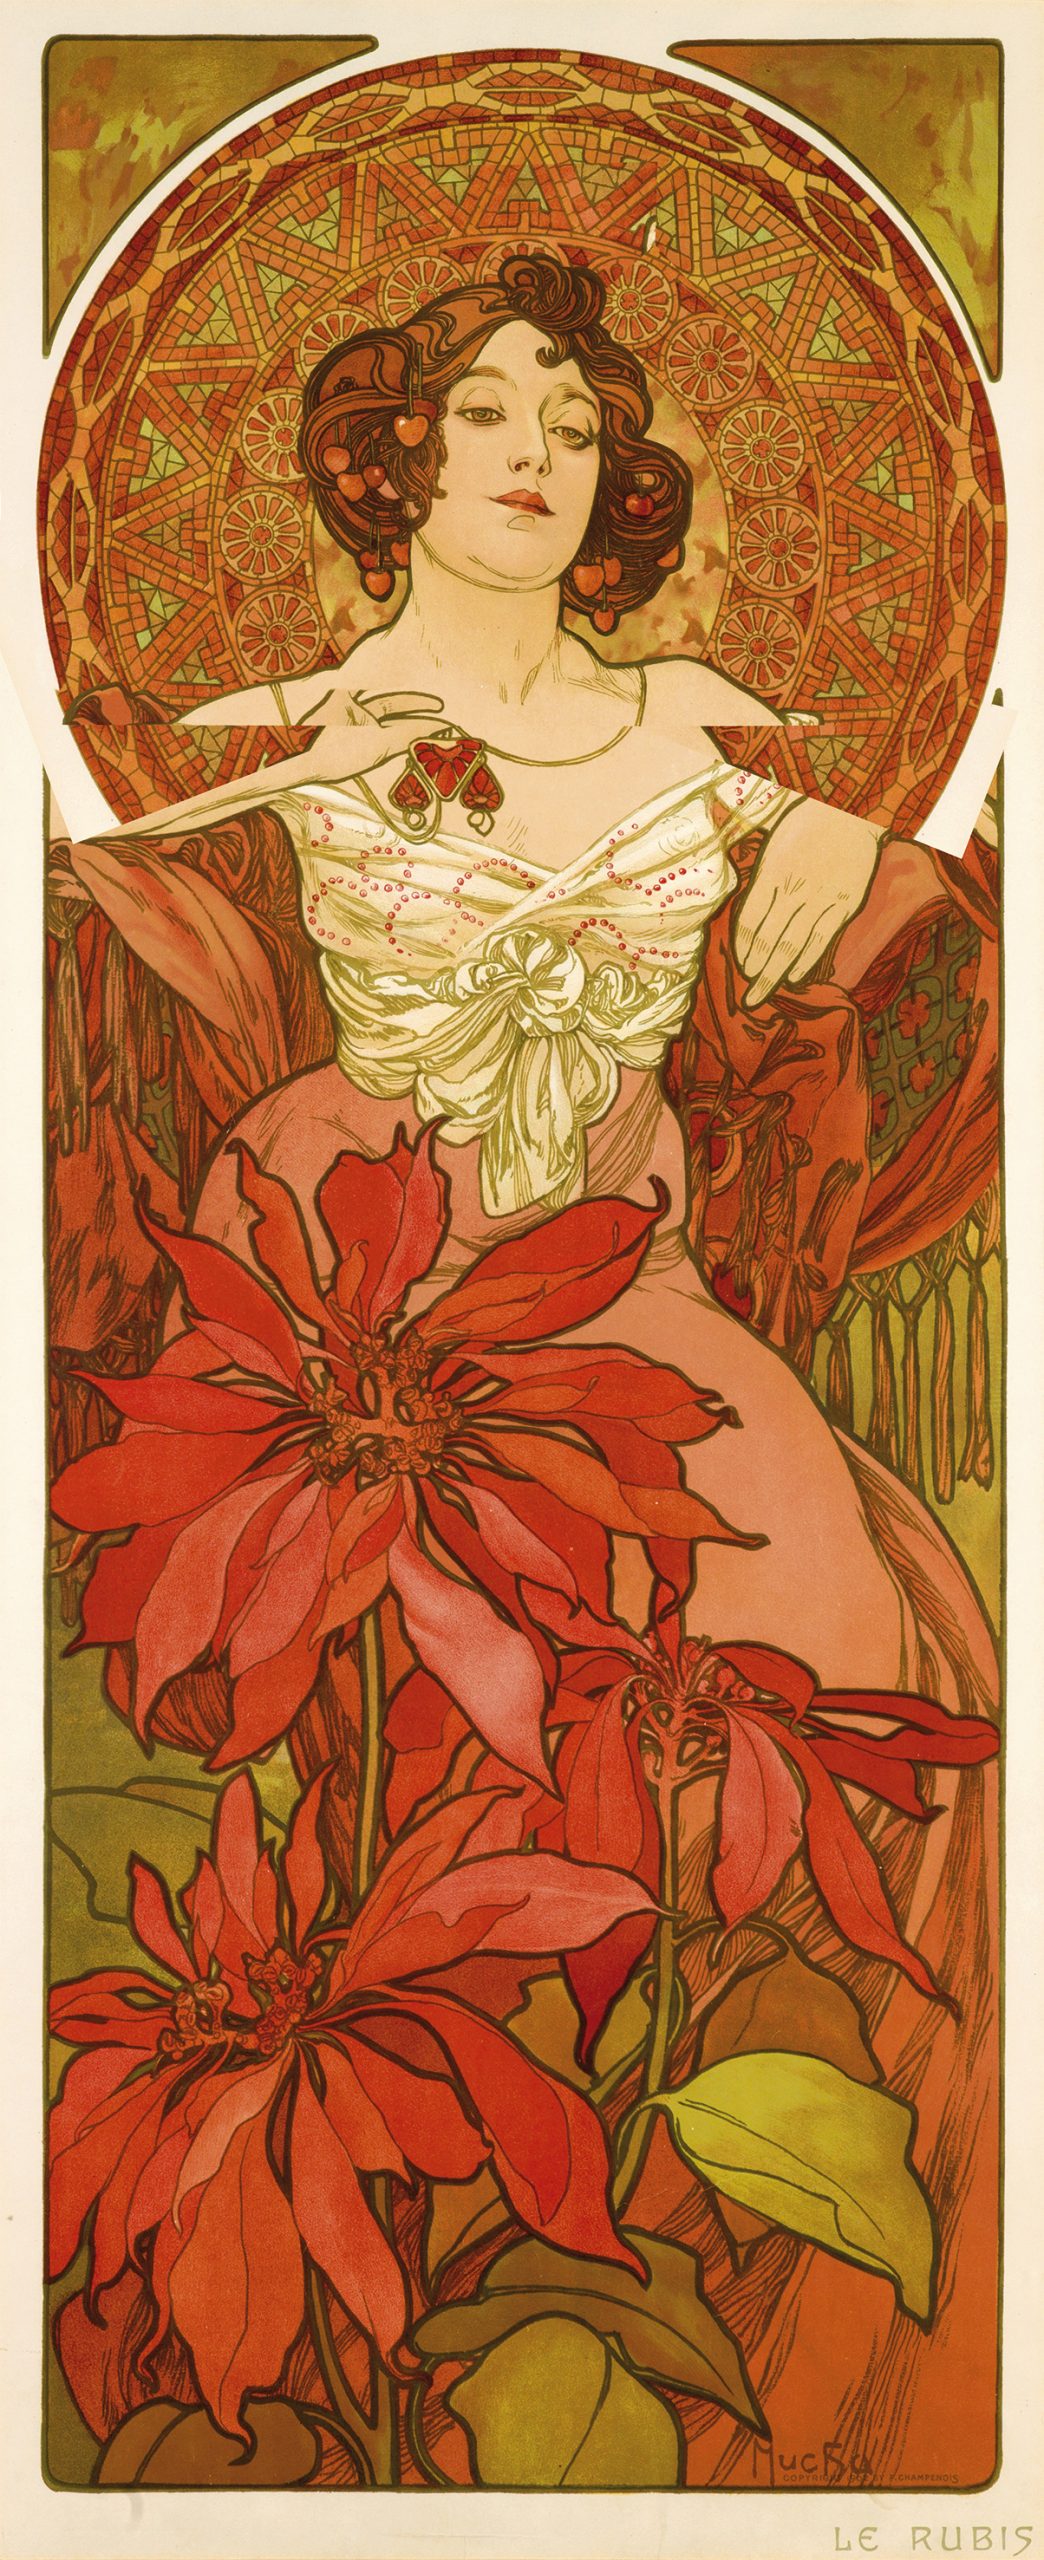 A poster of a woman in a cream and red dress with red halo behind her and red flowers overlaying her.